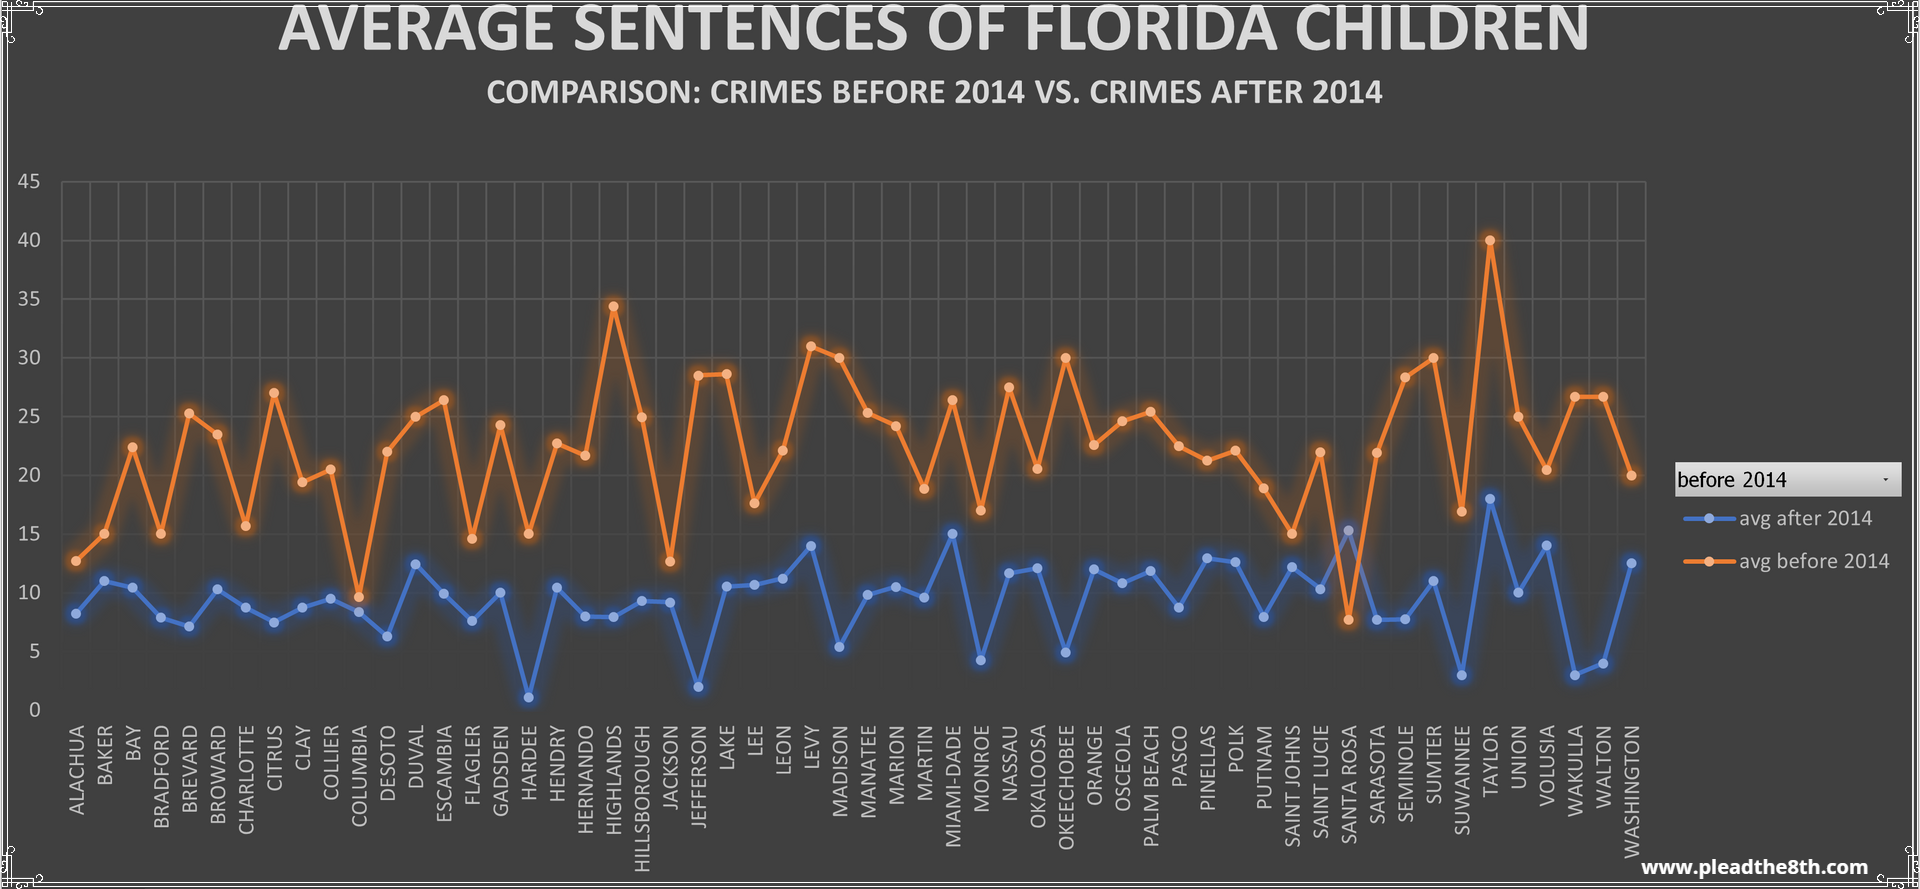 The data details the average sentences of children pre-and post-2014 by county of offense.
In a significant majority of Florida counties, post-2014 juvenile sentencing averages have decreased by more than one decade compared to the sentencing averages of children pre-2014.